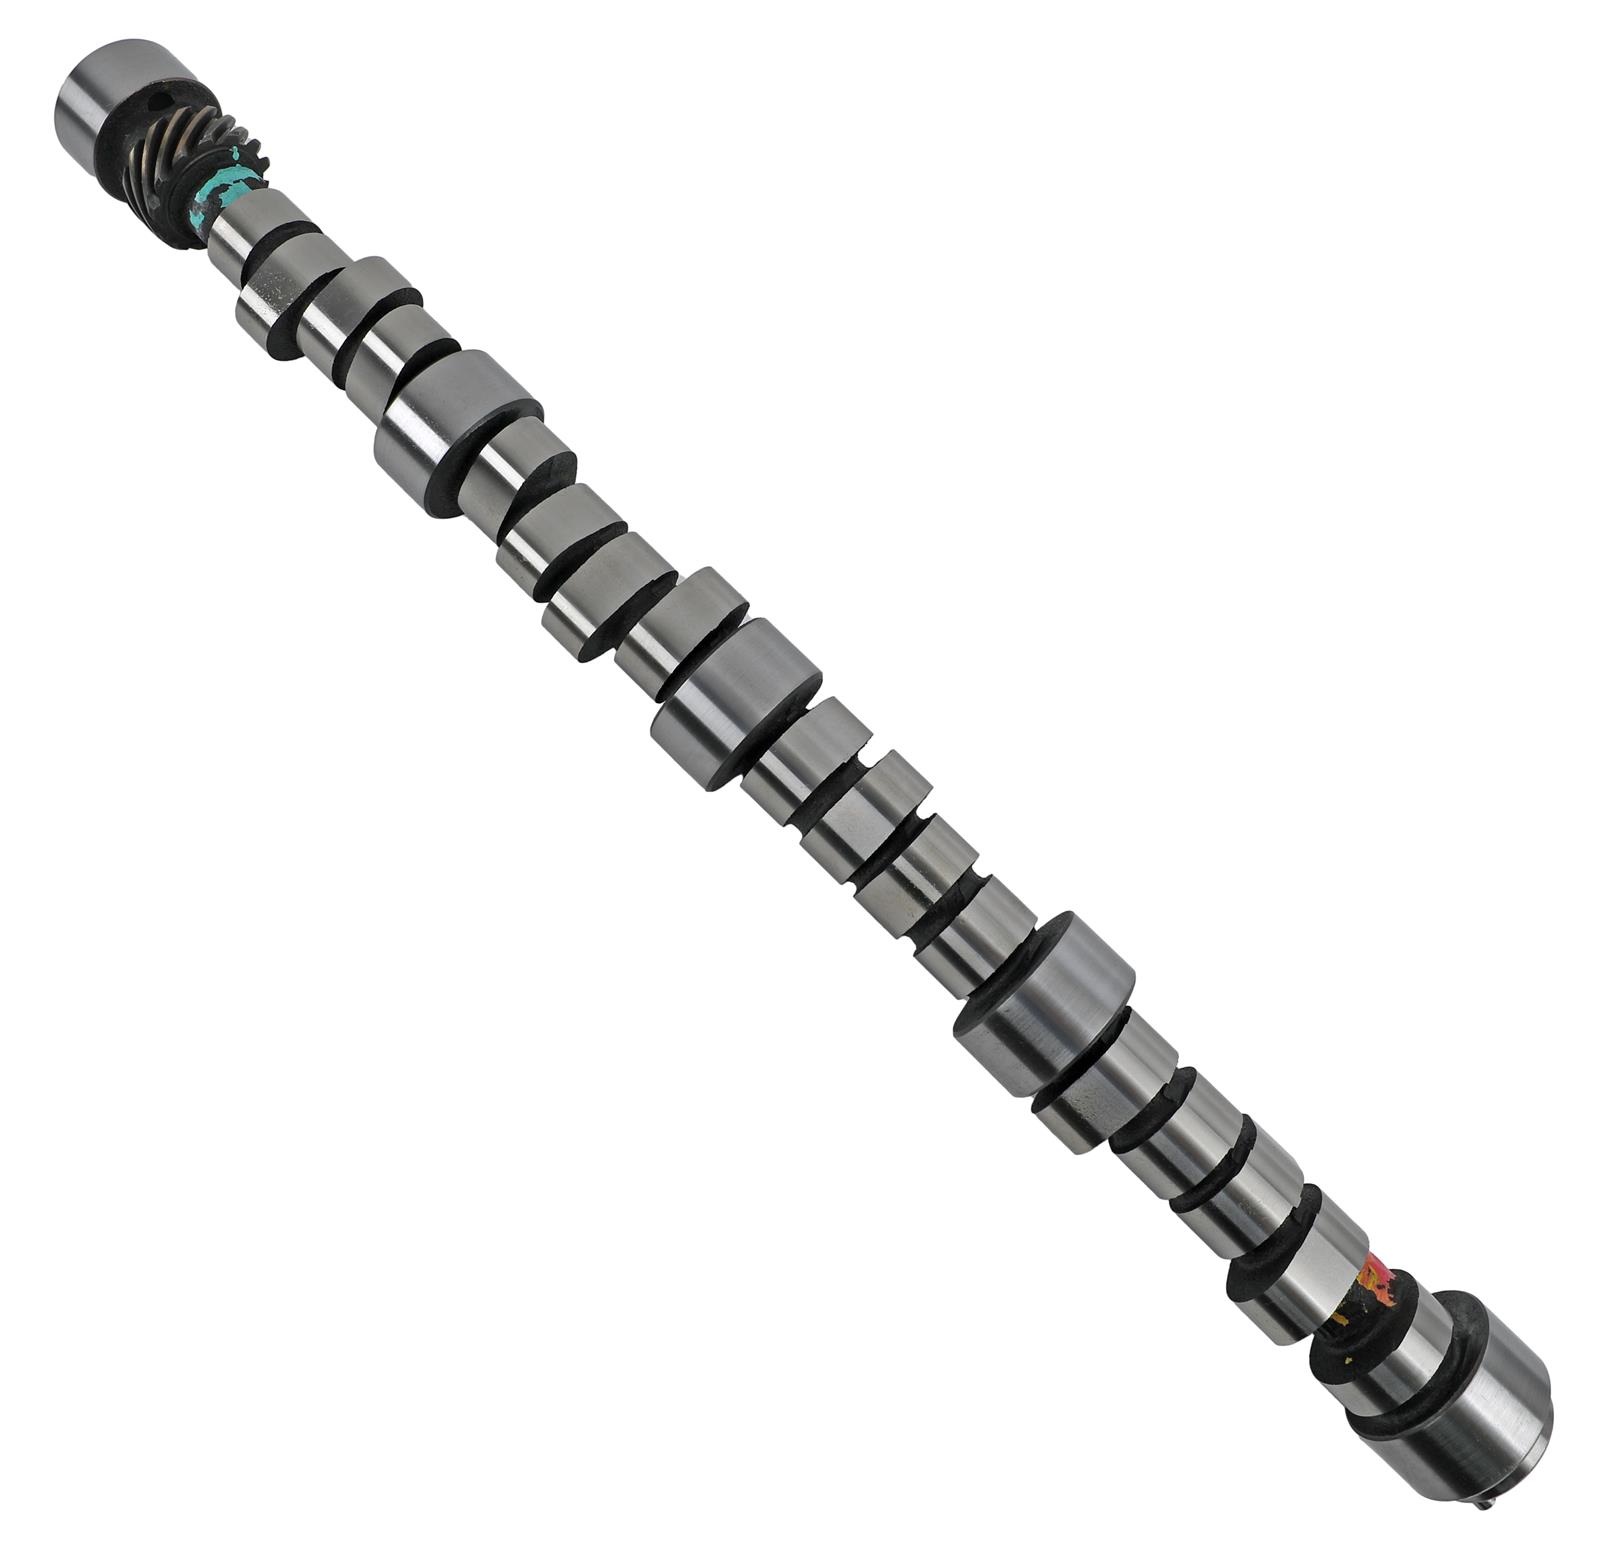 COMP Cams 01-451-8 COMP Cams Xtreme Marine Camshafts | Summit Racing